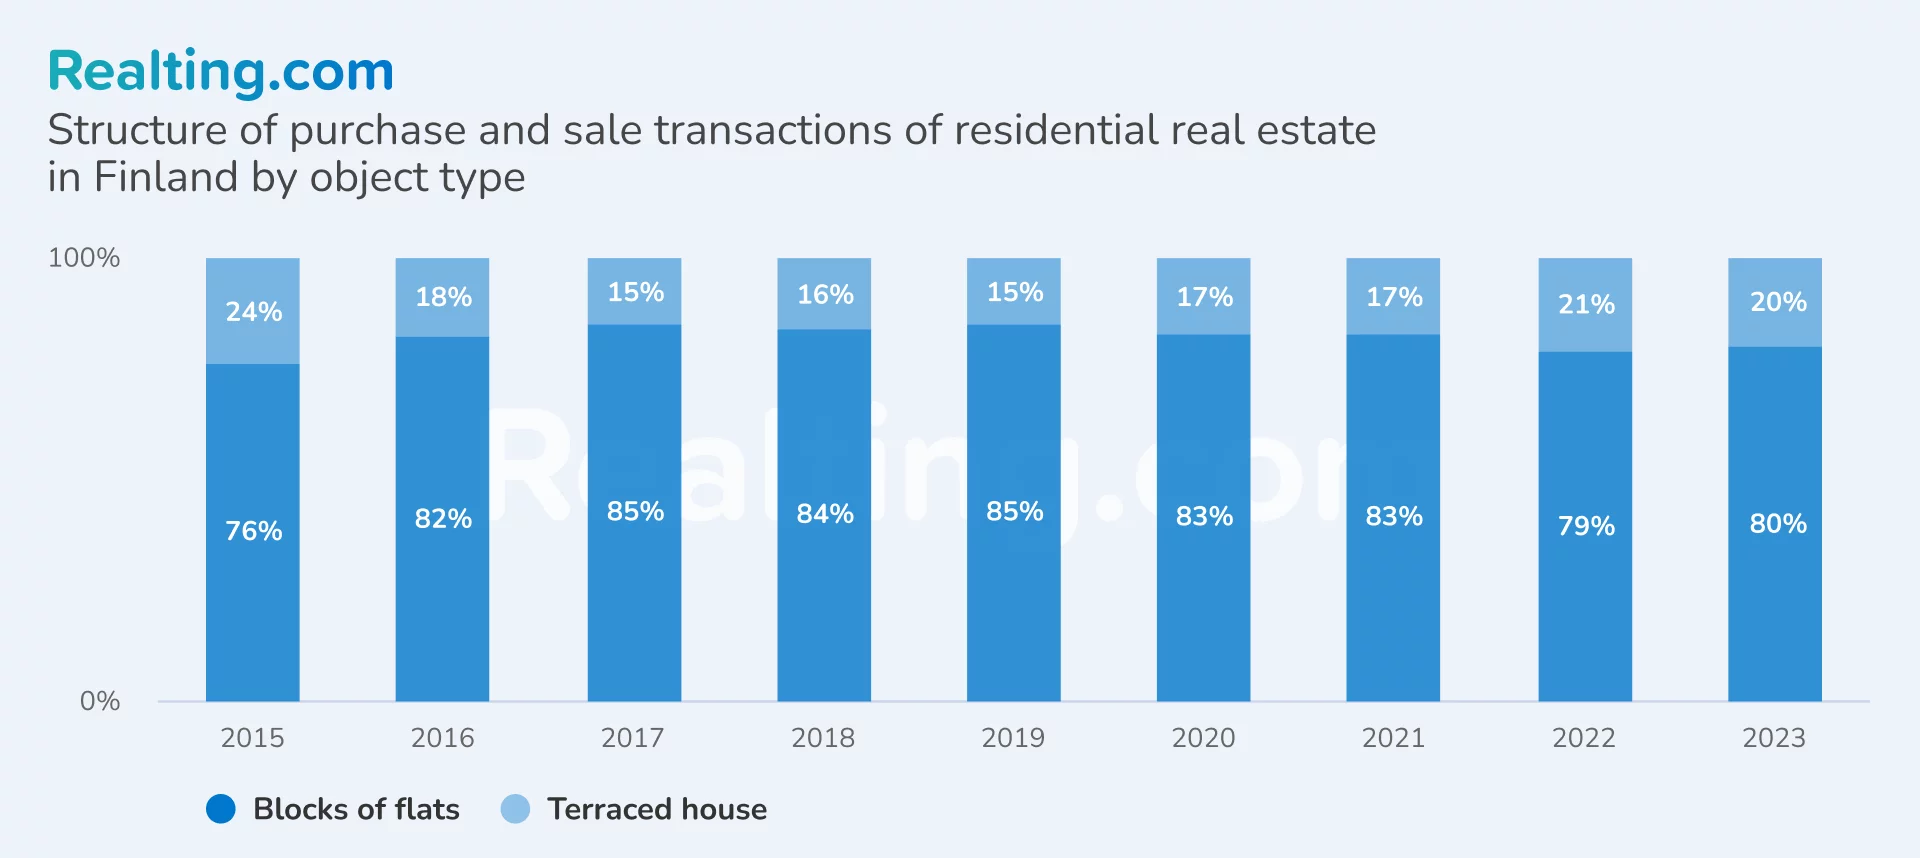 Structure of purchase and sale transactions of residential real estate in Finland by object type